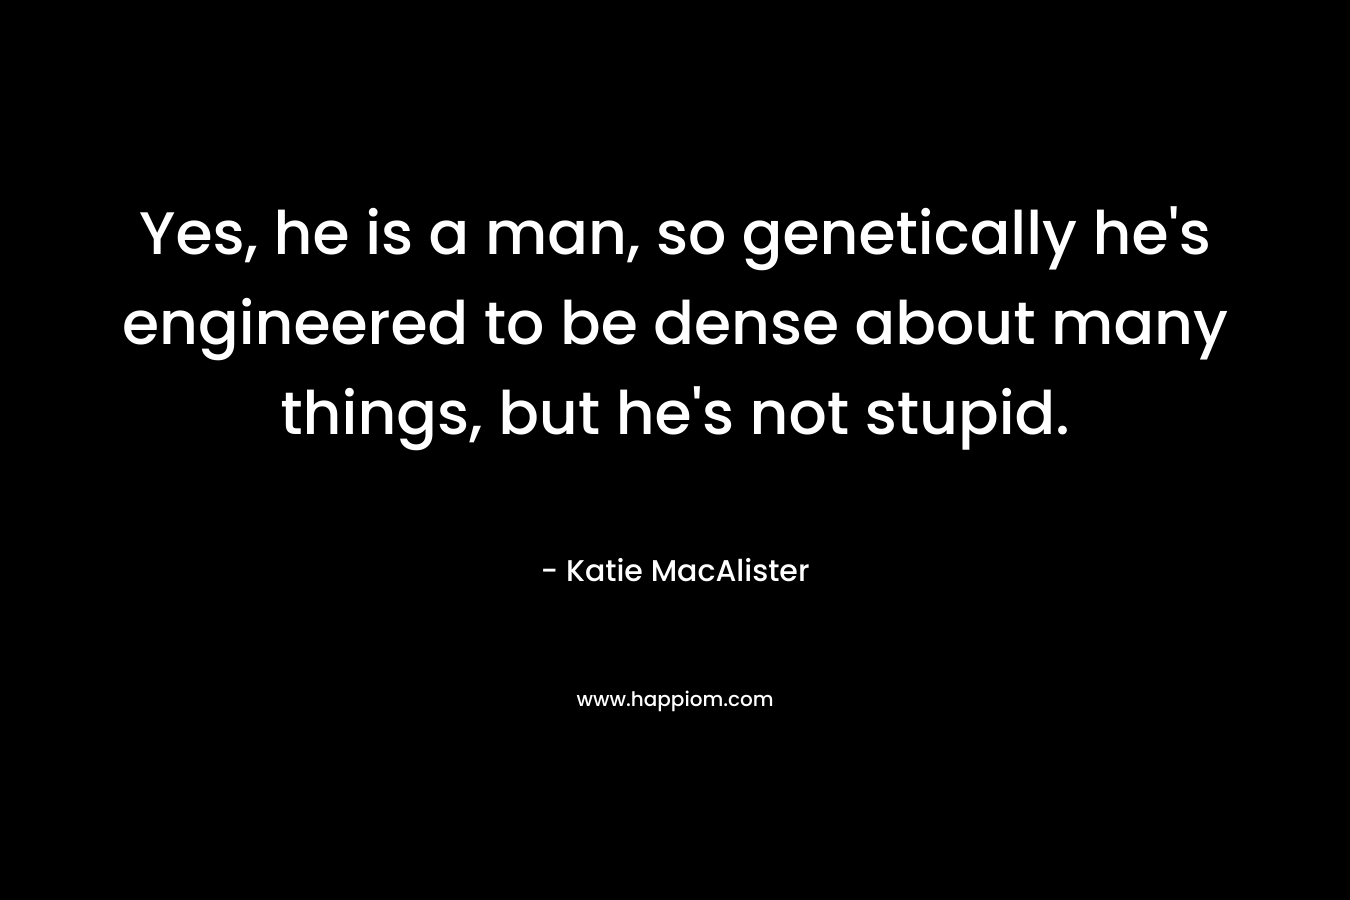 Yes, he is a man, so genetically he’s engineered to be dense about many things, but he’s not stupid.  – Katie MacAlister